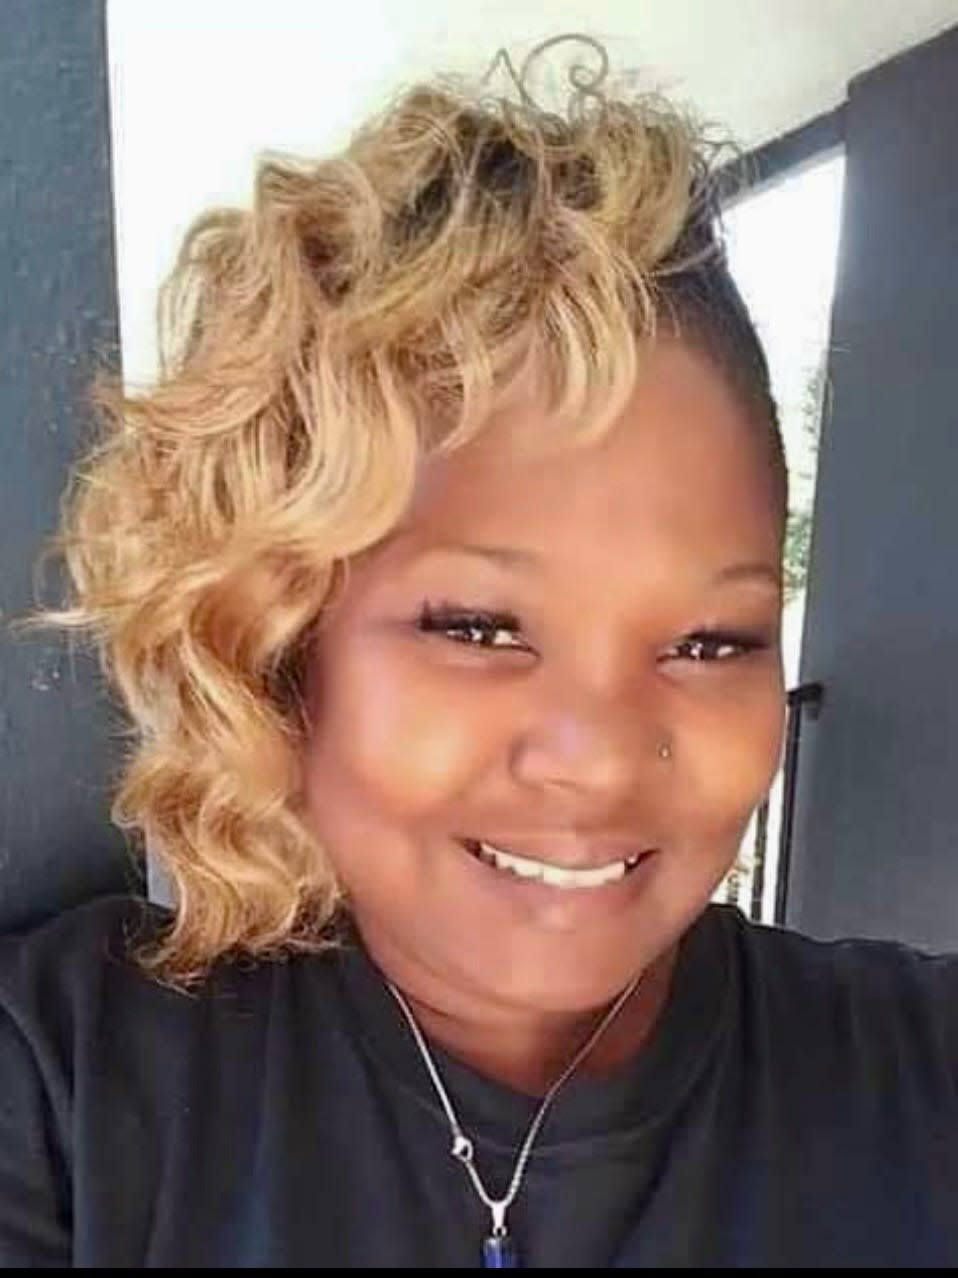 Eleecia Smith died suddenly on Jan. 8. Her family's devastation escalated when they learned a few days after she was buried that she had been interred in the wrong burial plot. They say they were traumatized by having to watch her casket be moved and reburied.